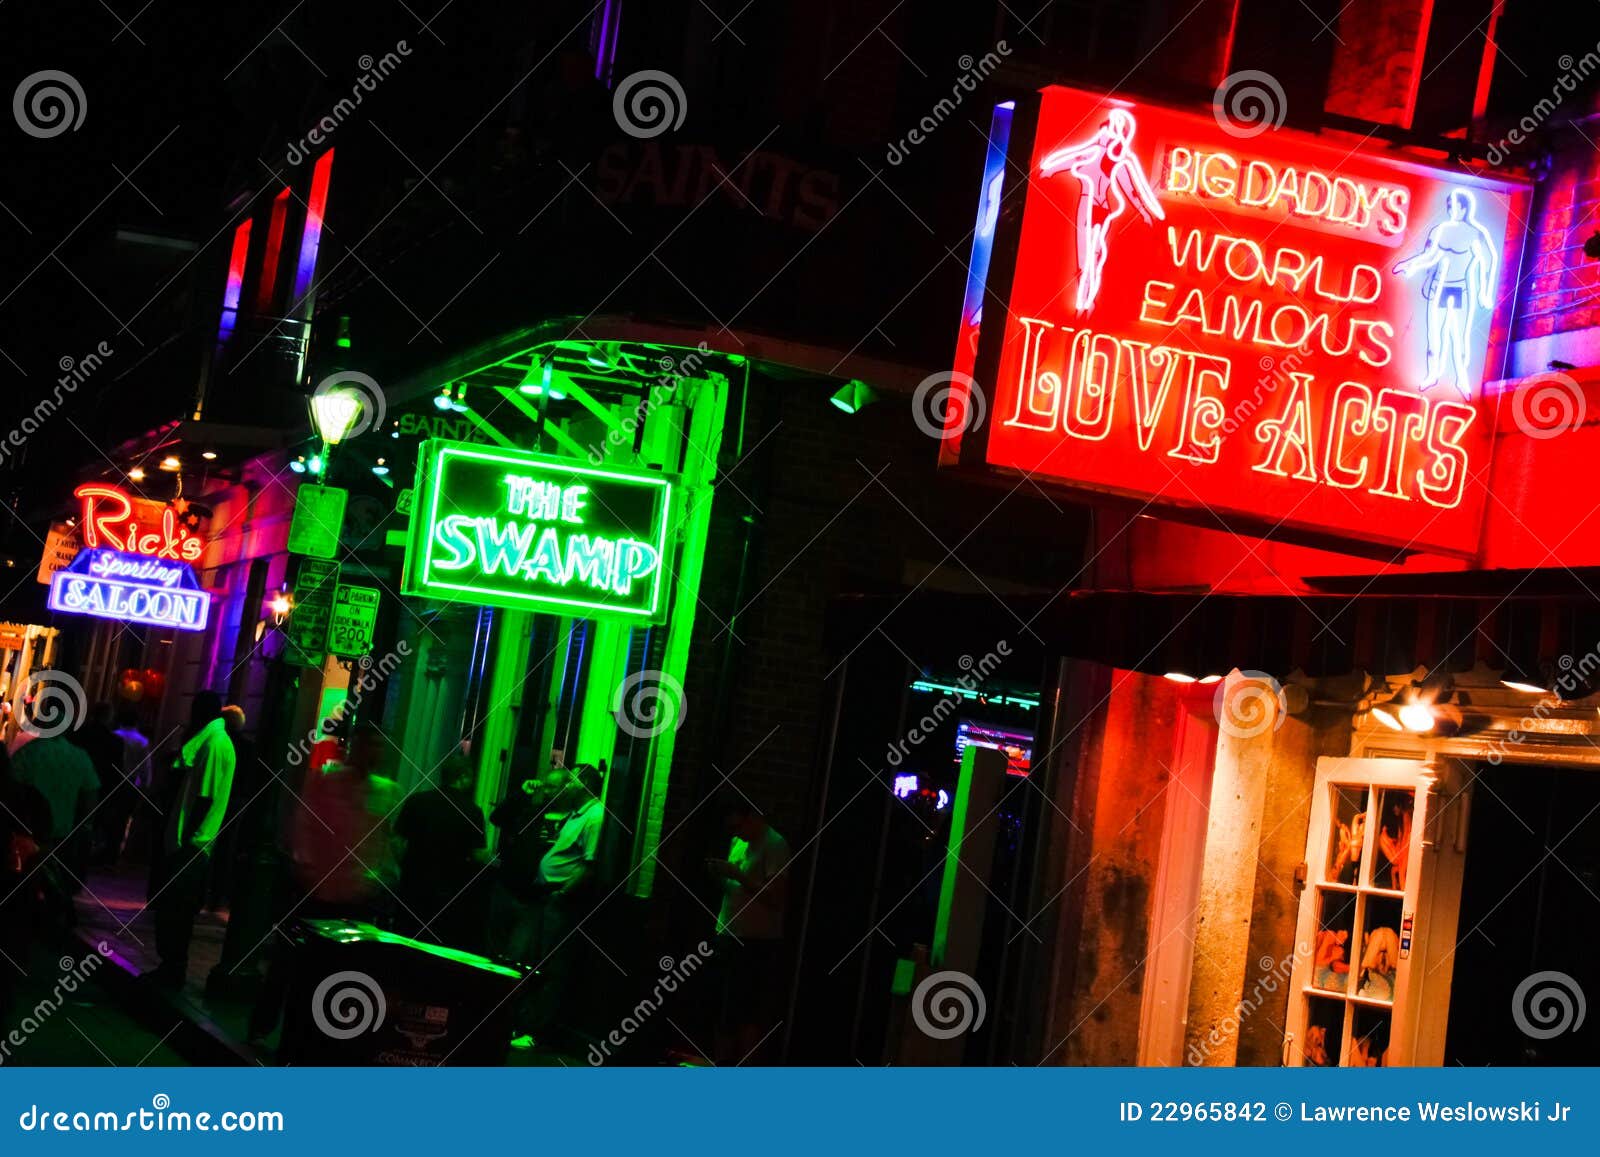 New Orleans Bourbon Street Bars and Sex Clubs 2 Editorial Photography image